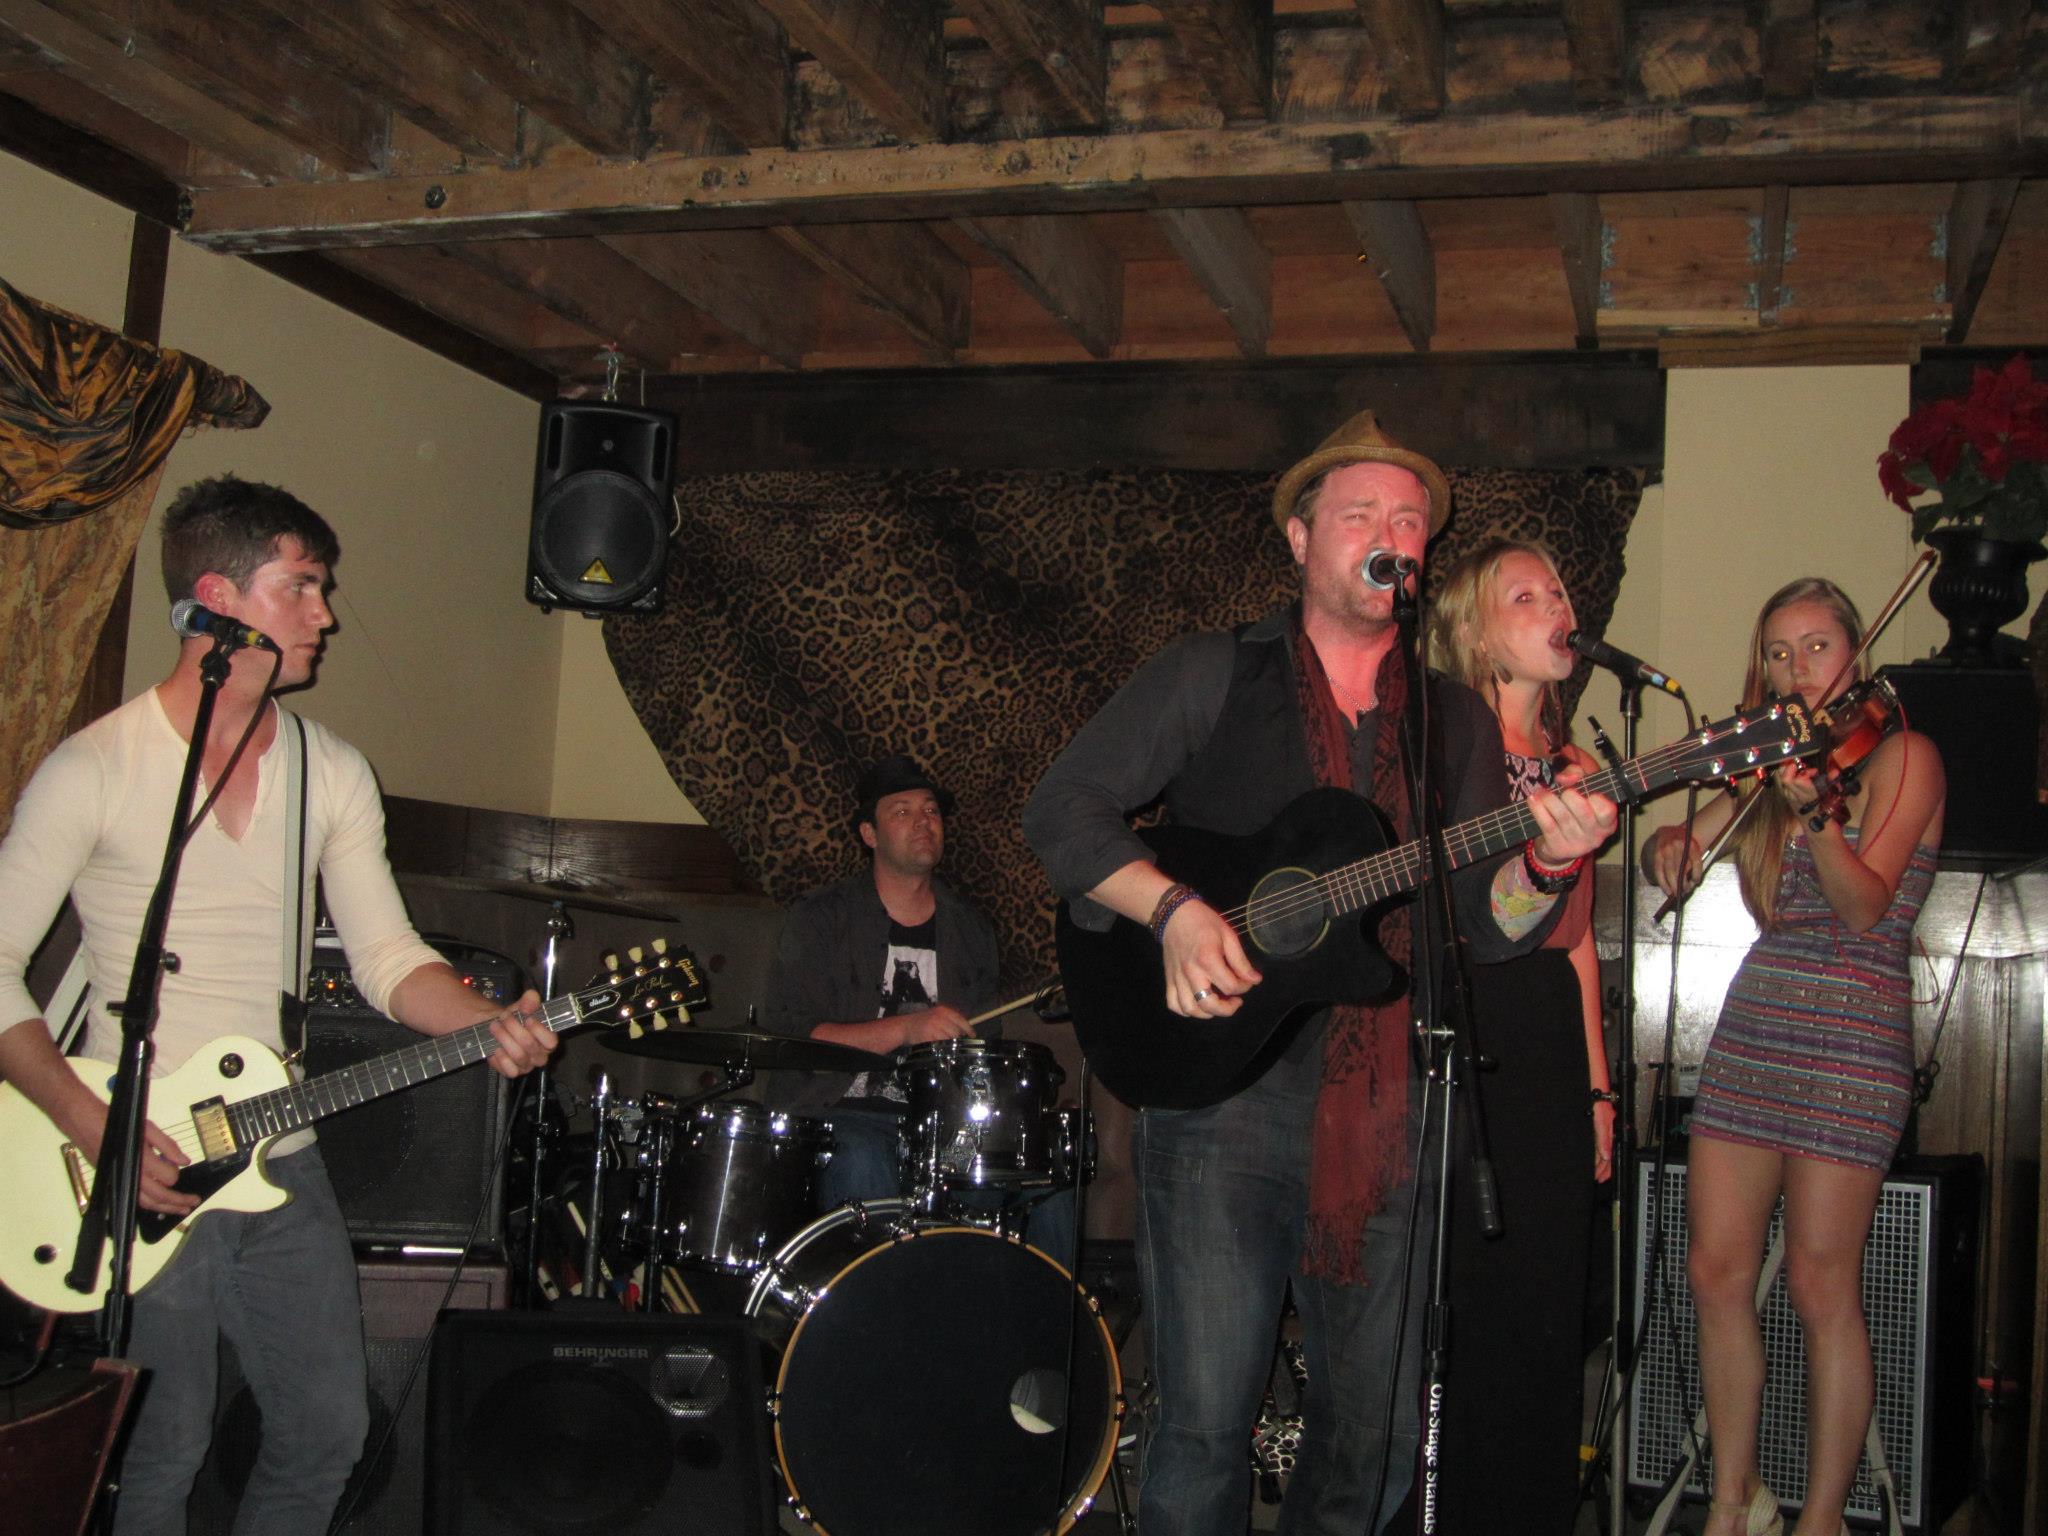 Performing with The Harmless Doves at the Pig 'N Whistle in Hollywood